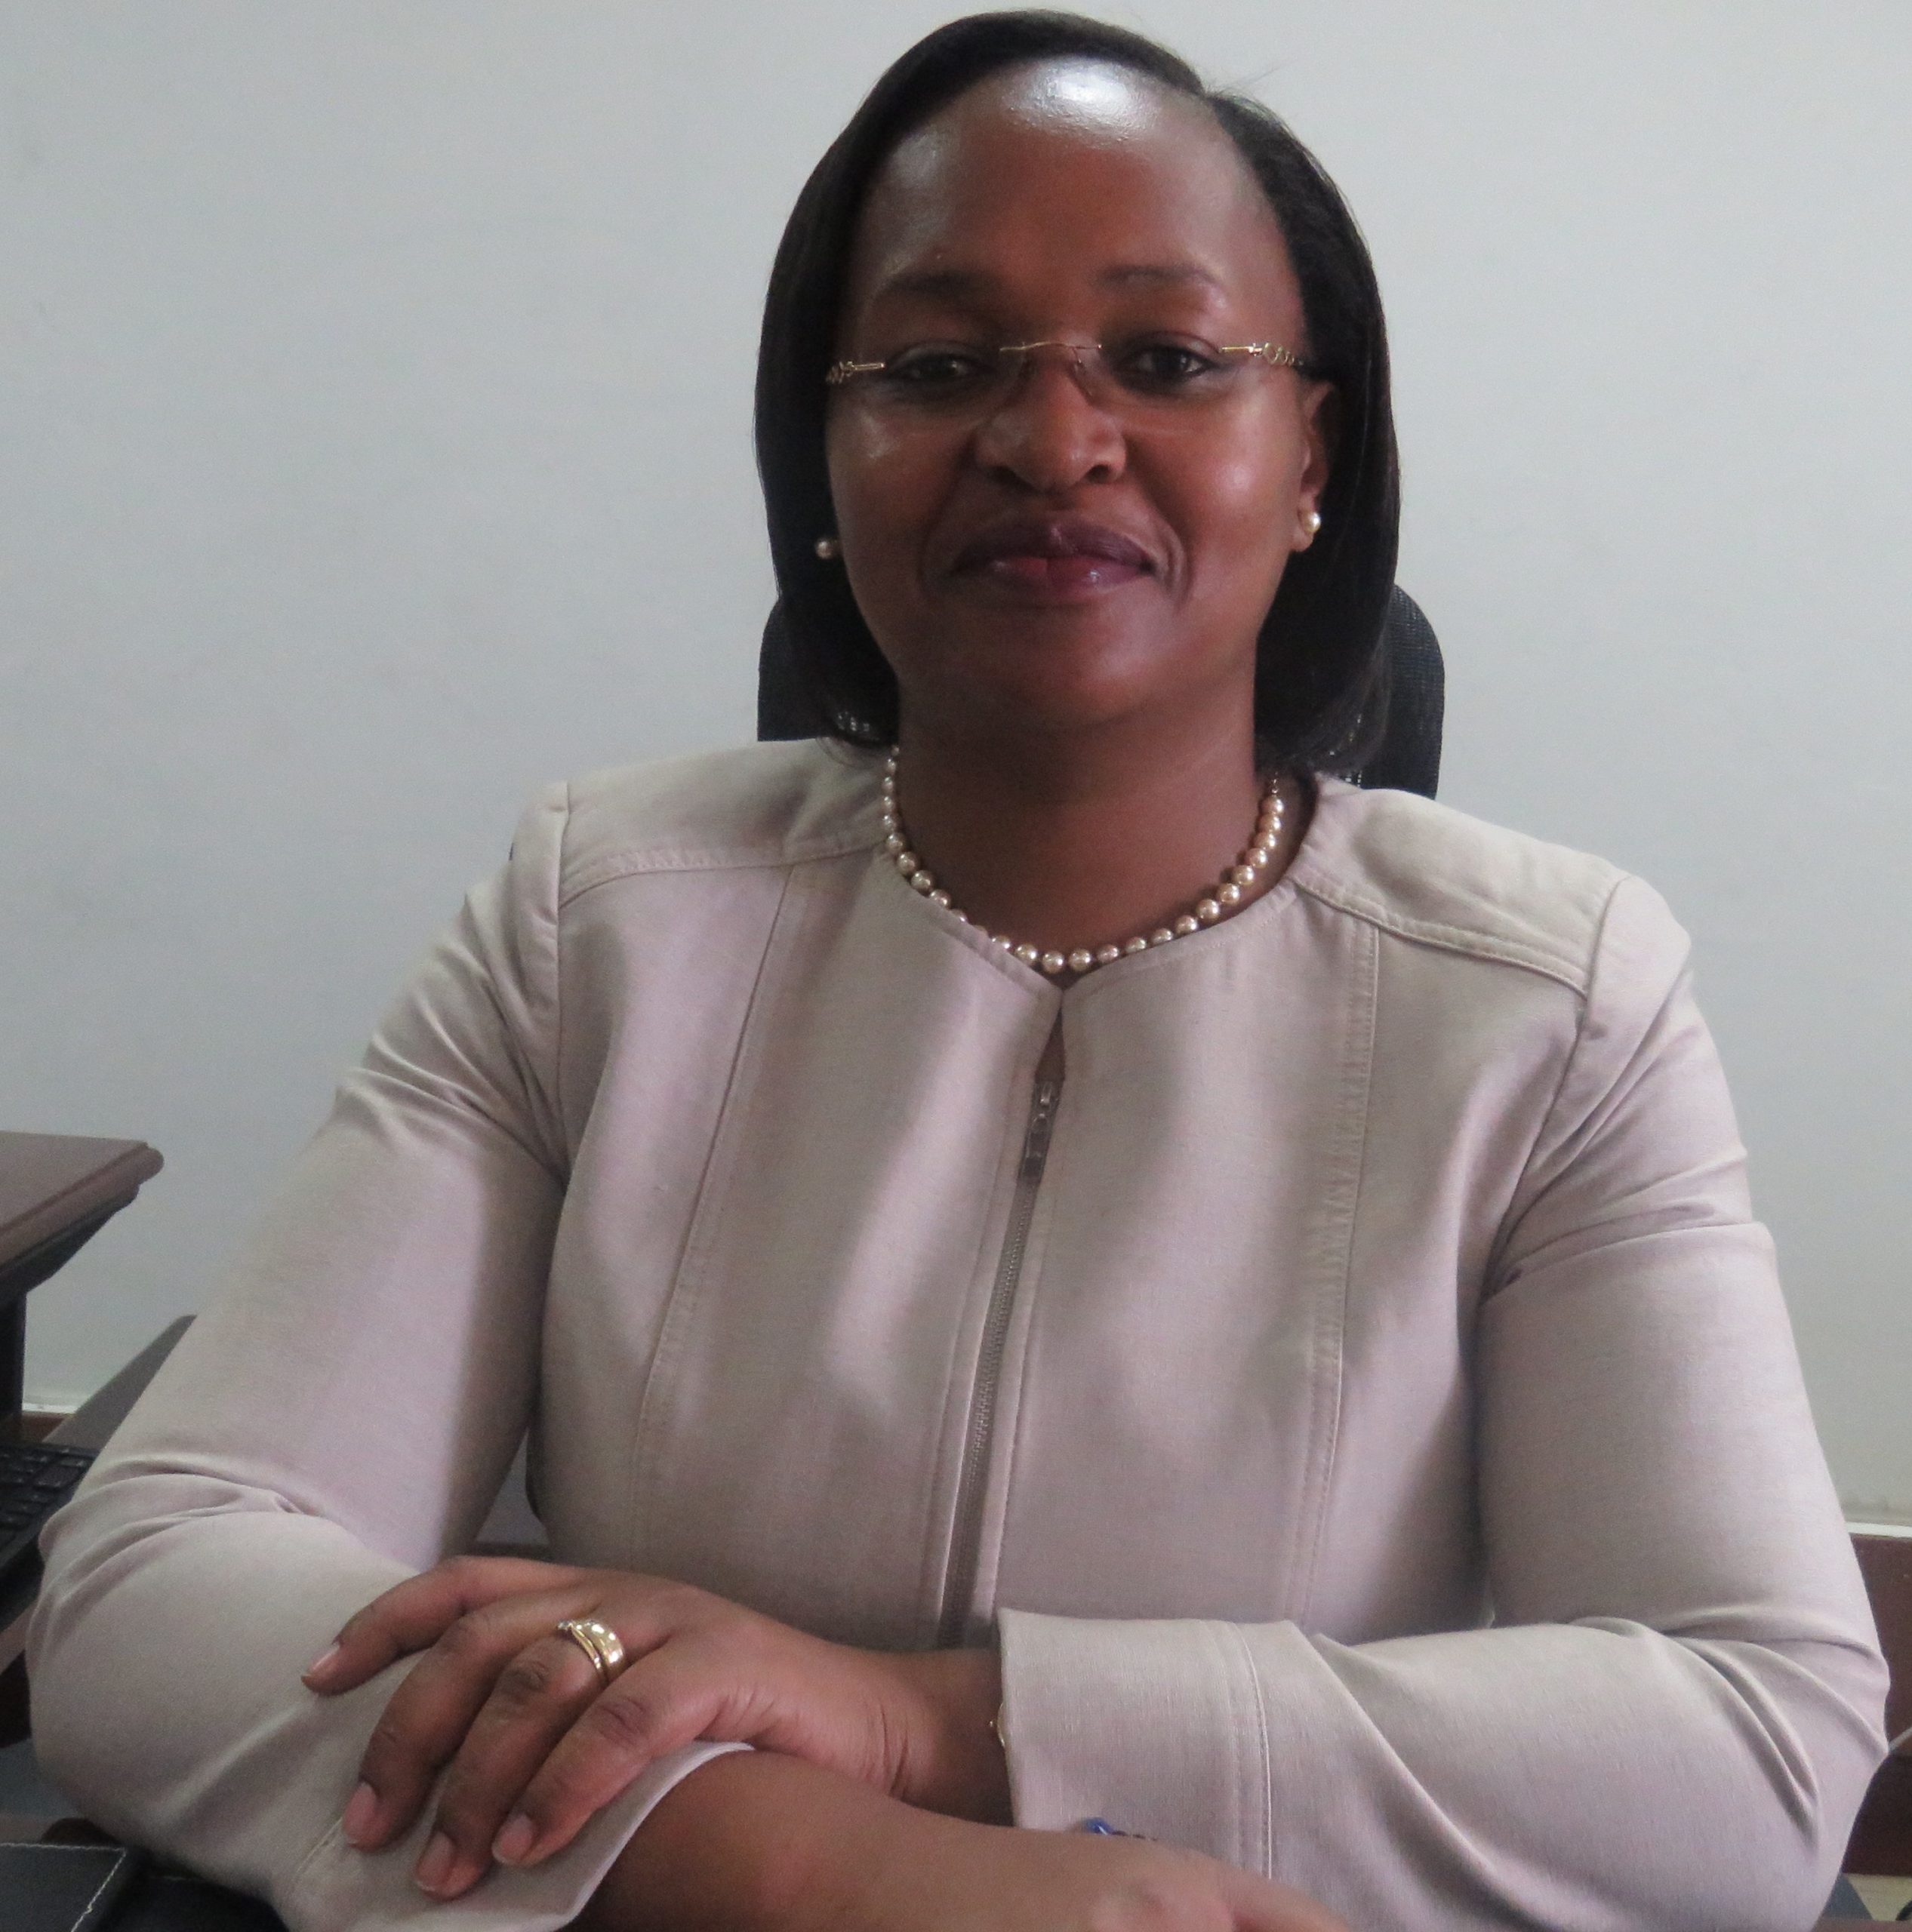 KRA Appoints Rispah Simiyu to the Commissioner of Taxes Position